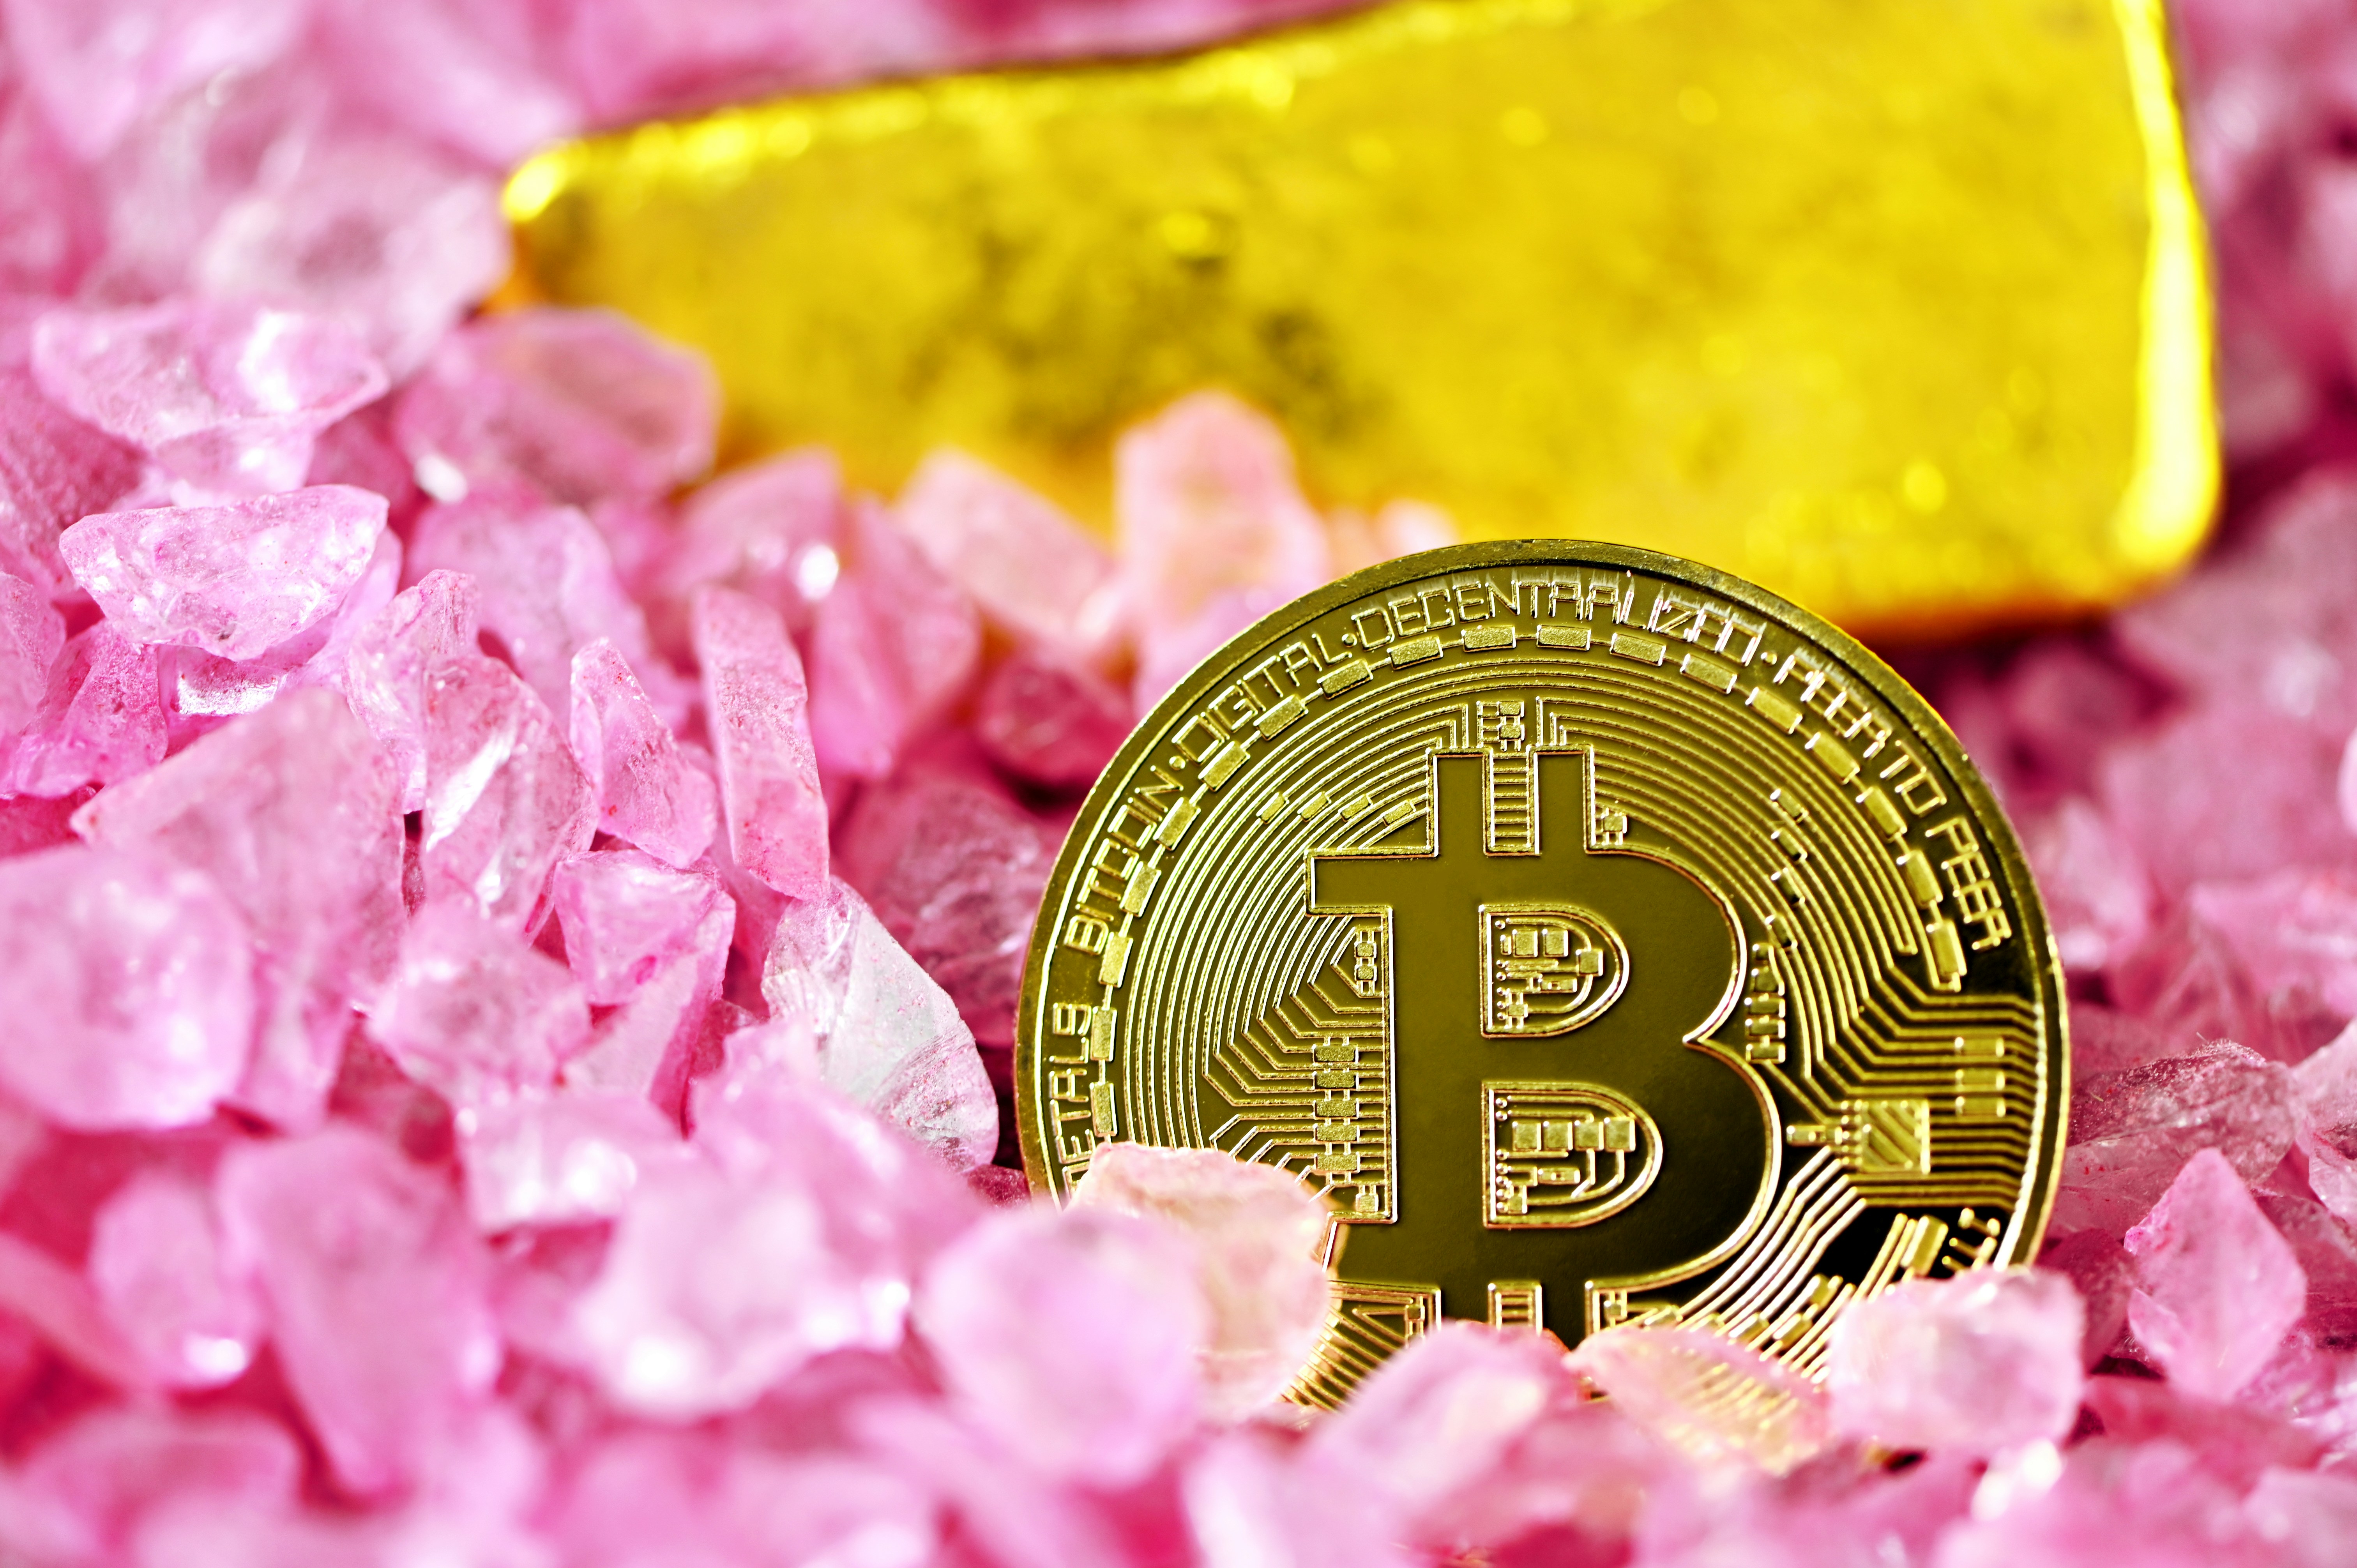 Bitcoin with gold and pink crystals